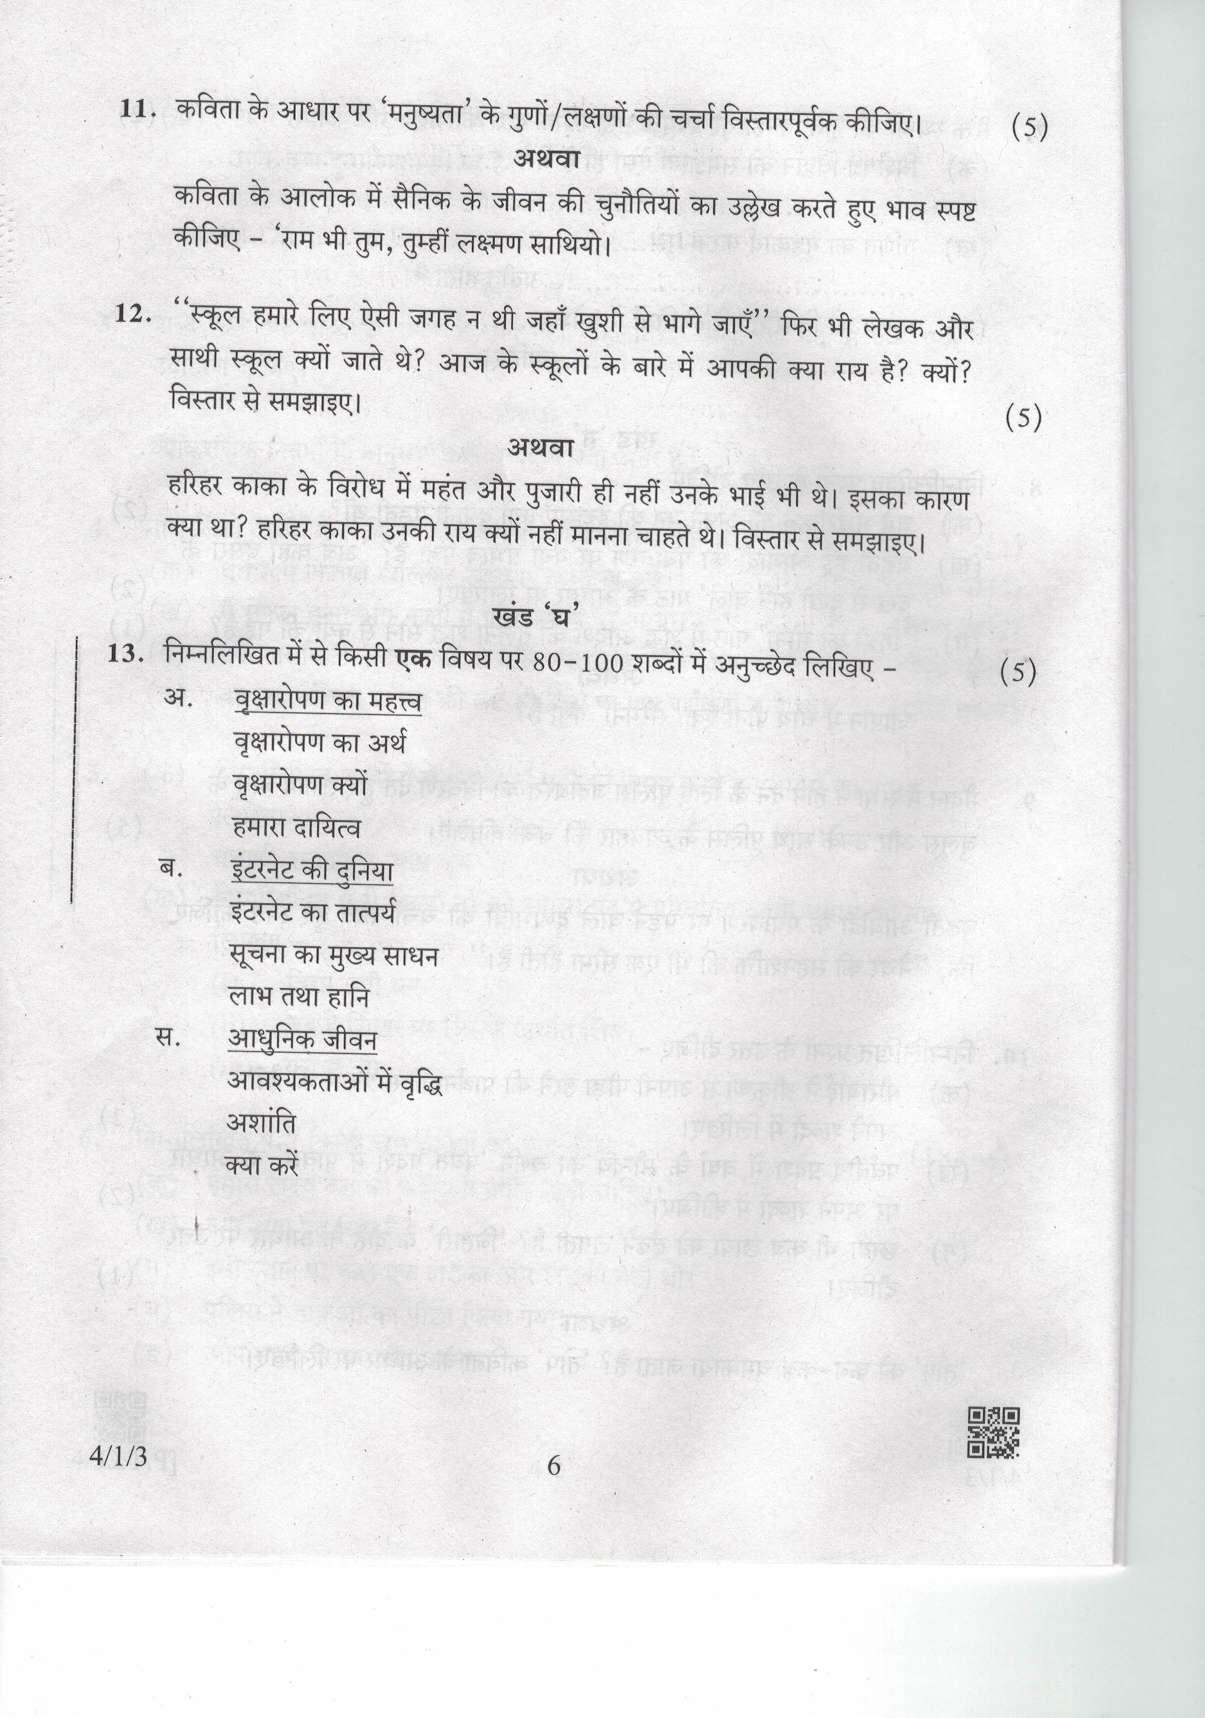 CBSE Class 10 4-1-3 Hindi-B 2019 Question Paper - Page 6